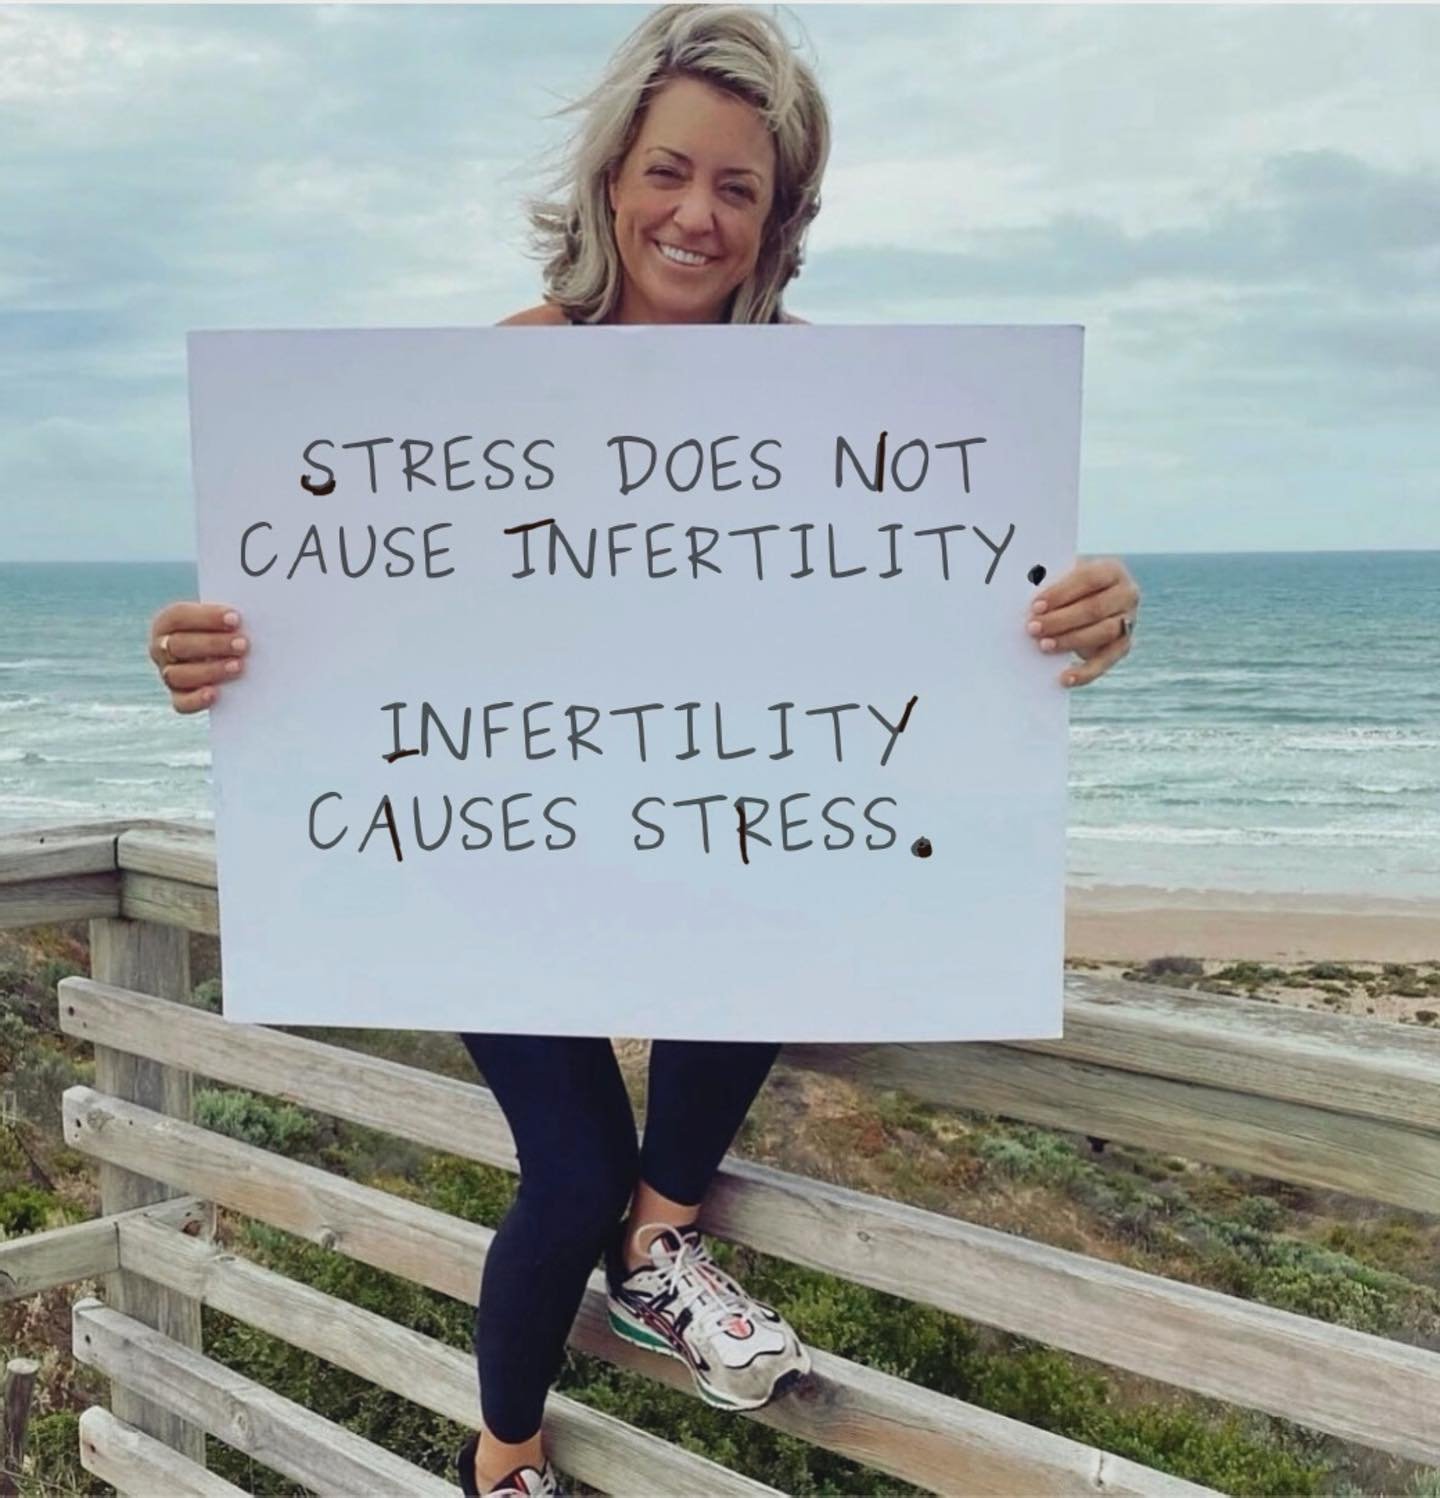 I could write an essay about this. Infertility is a medical condition. It's nothing anyone said, did, drank, thought or ate. It's certainly not caused by stress.

Telling someone their stress is the reason they're not pregnant is insulting. For examp